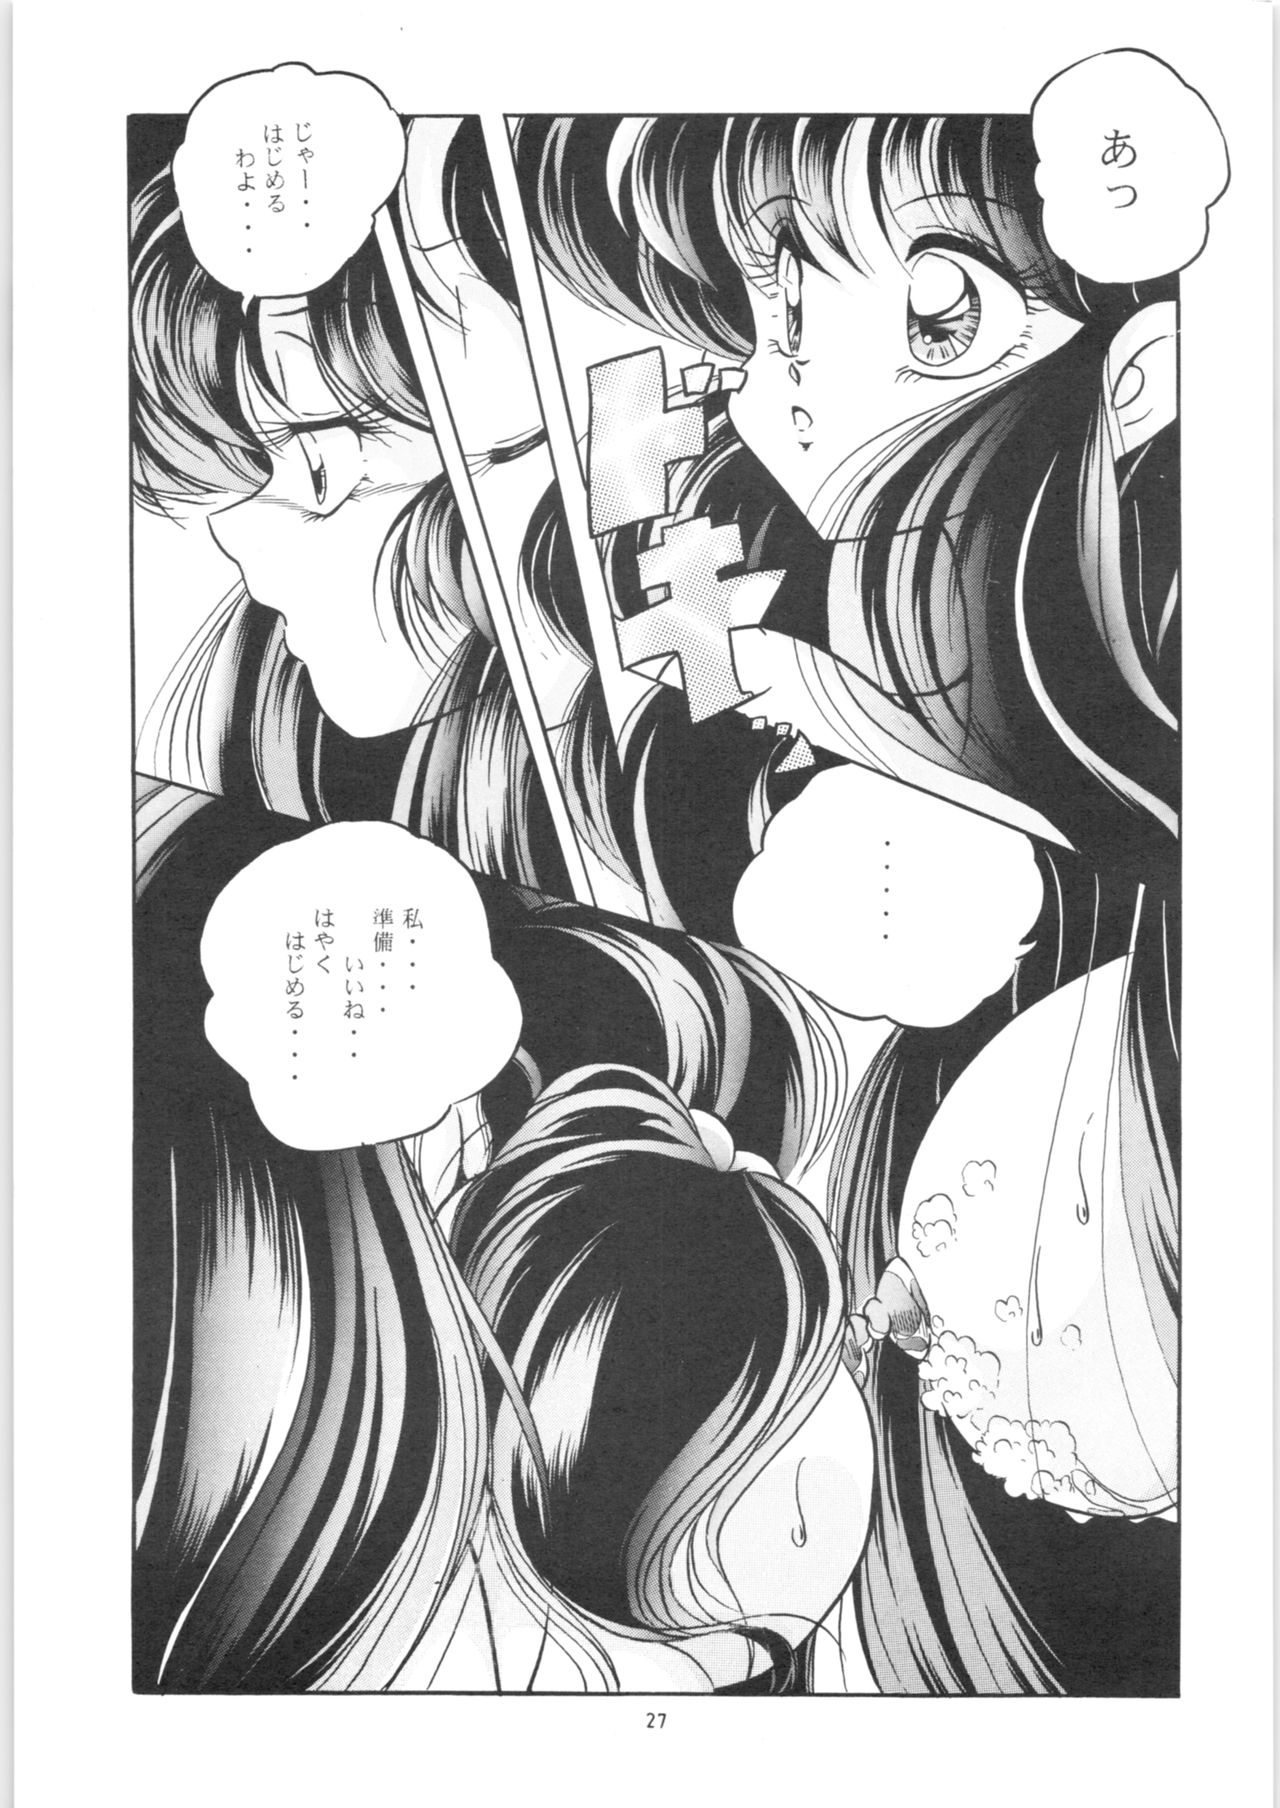 [C-COMPANY] C-COMPANY SPECIAL STAGE 14 (Ranma 1/2) page 28 full